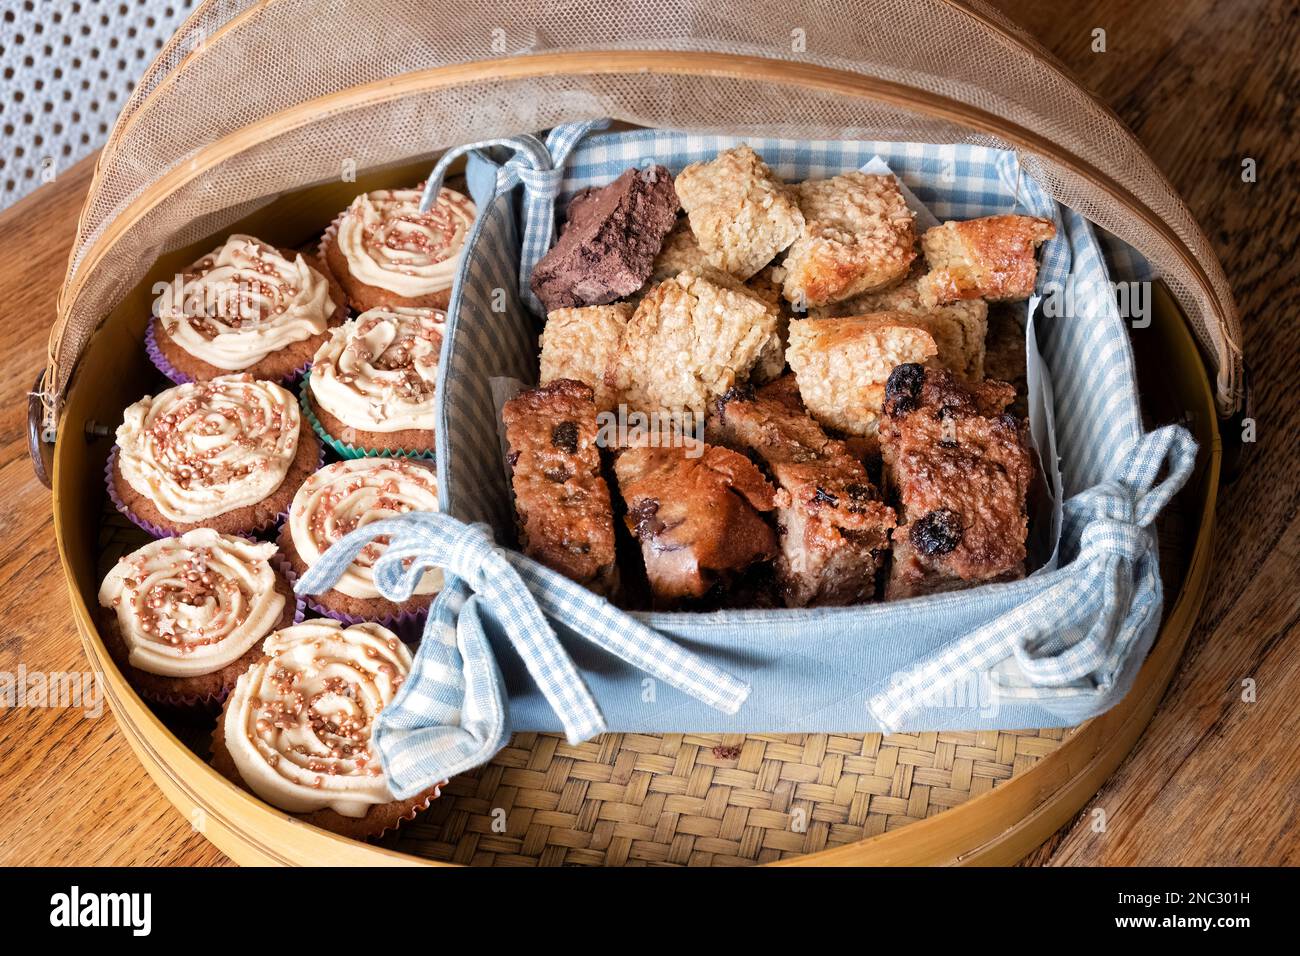 An assortment of tasty cake treats including cup cakes, Flapjacks and slices of Bread Pudding. All are displayed in a netted bamboo food cover Stock Photo